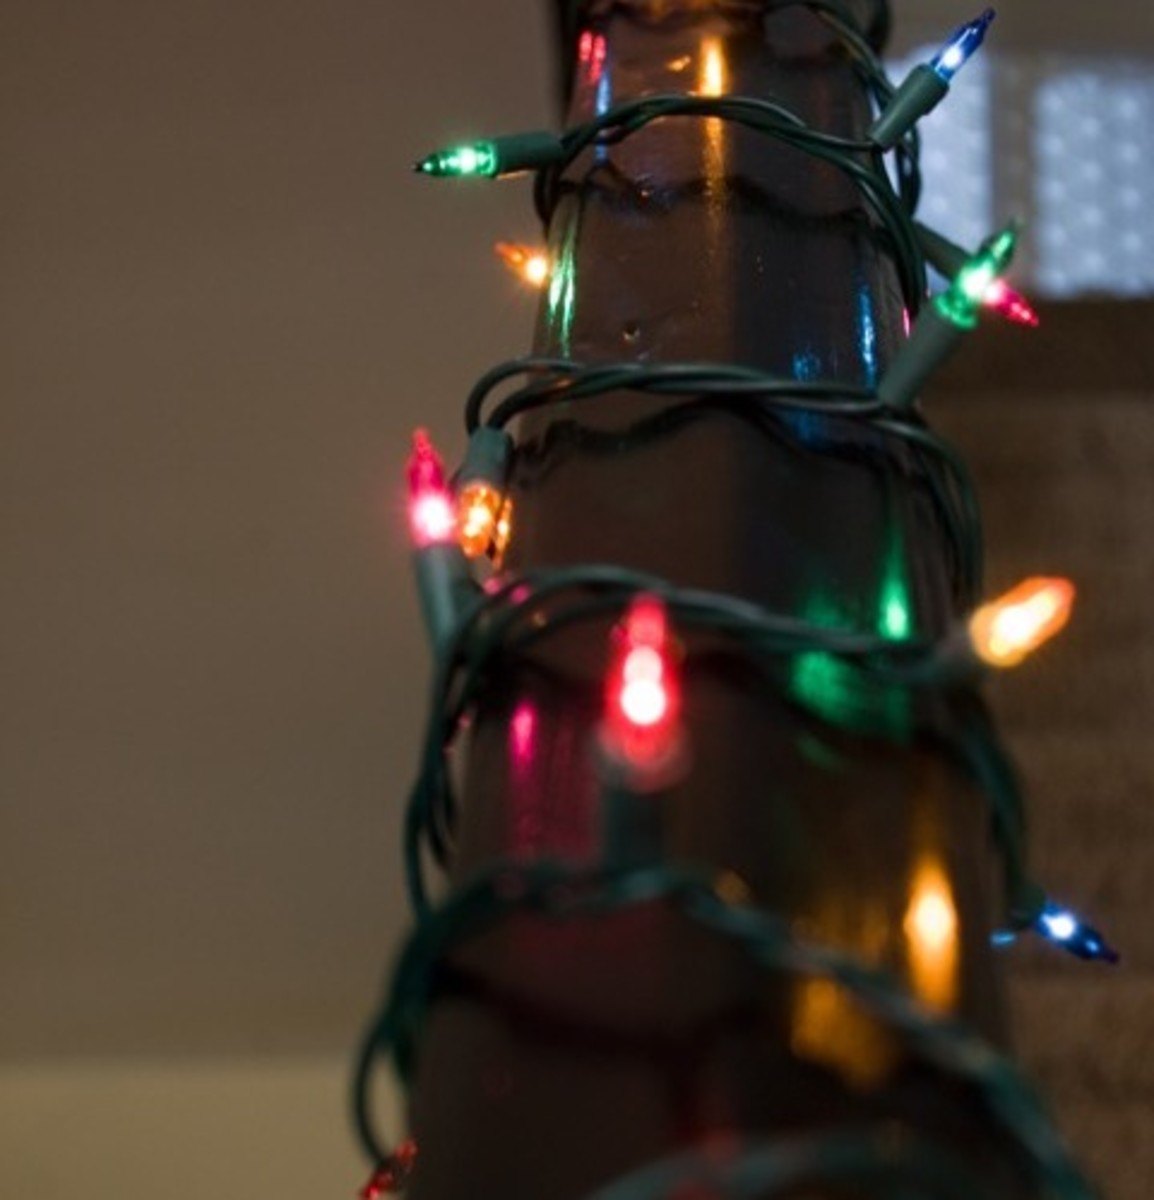 Hanging lights doesn't have to be hard!